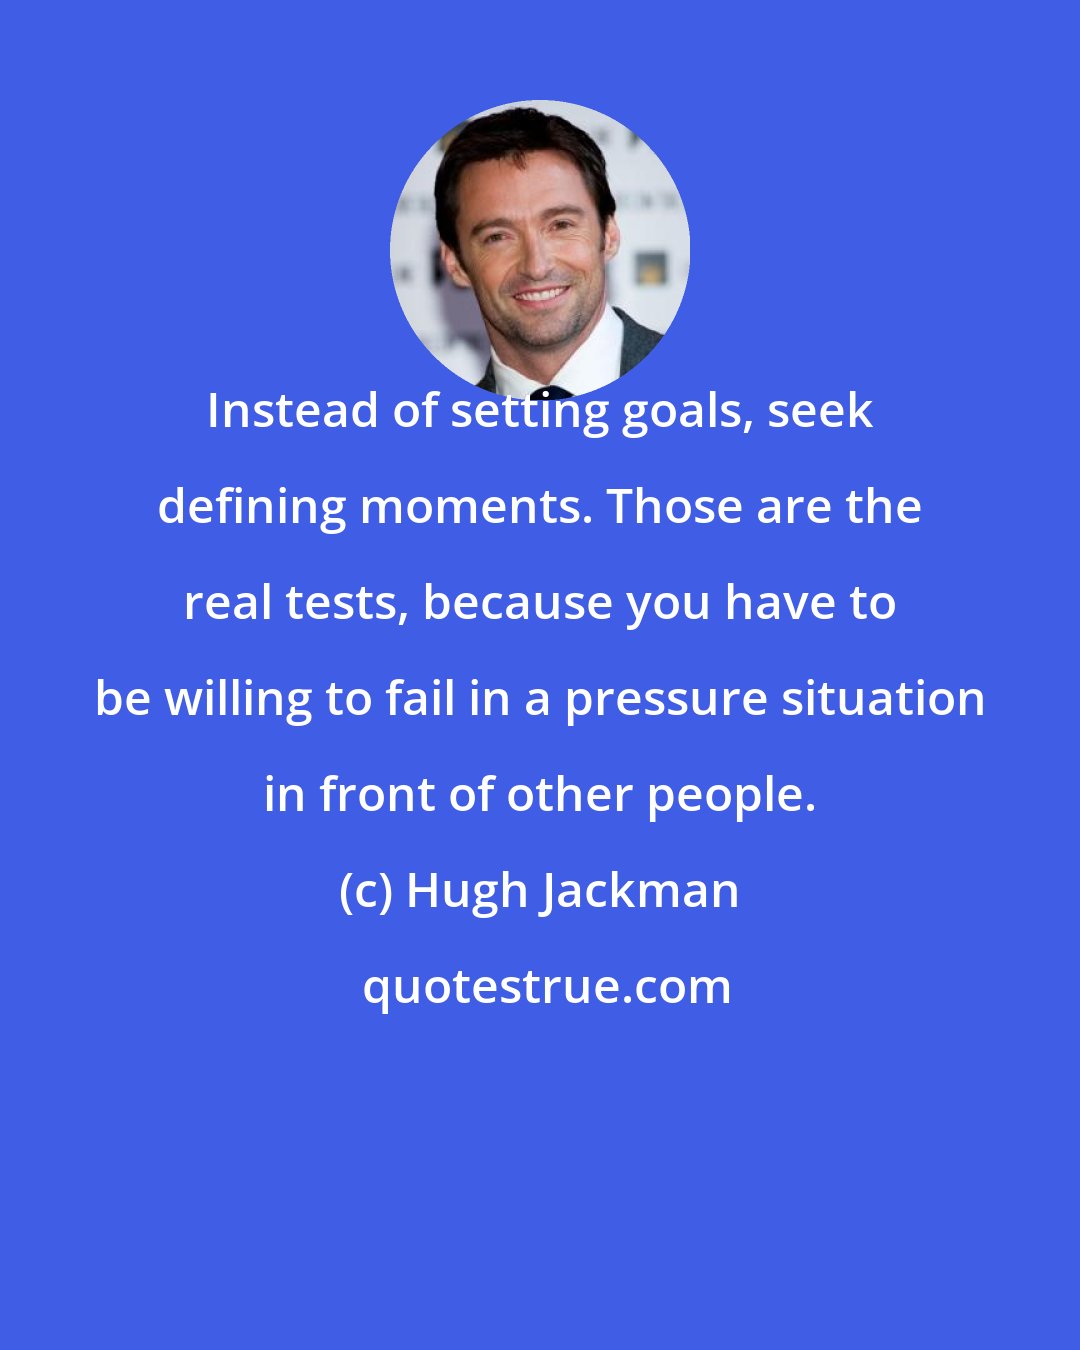 Hugh Jackman: Instead of setting goals, seek defining moments. Those are the real tests, because you have to be willing to fail in a pressure situation in front of other people.